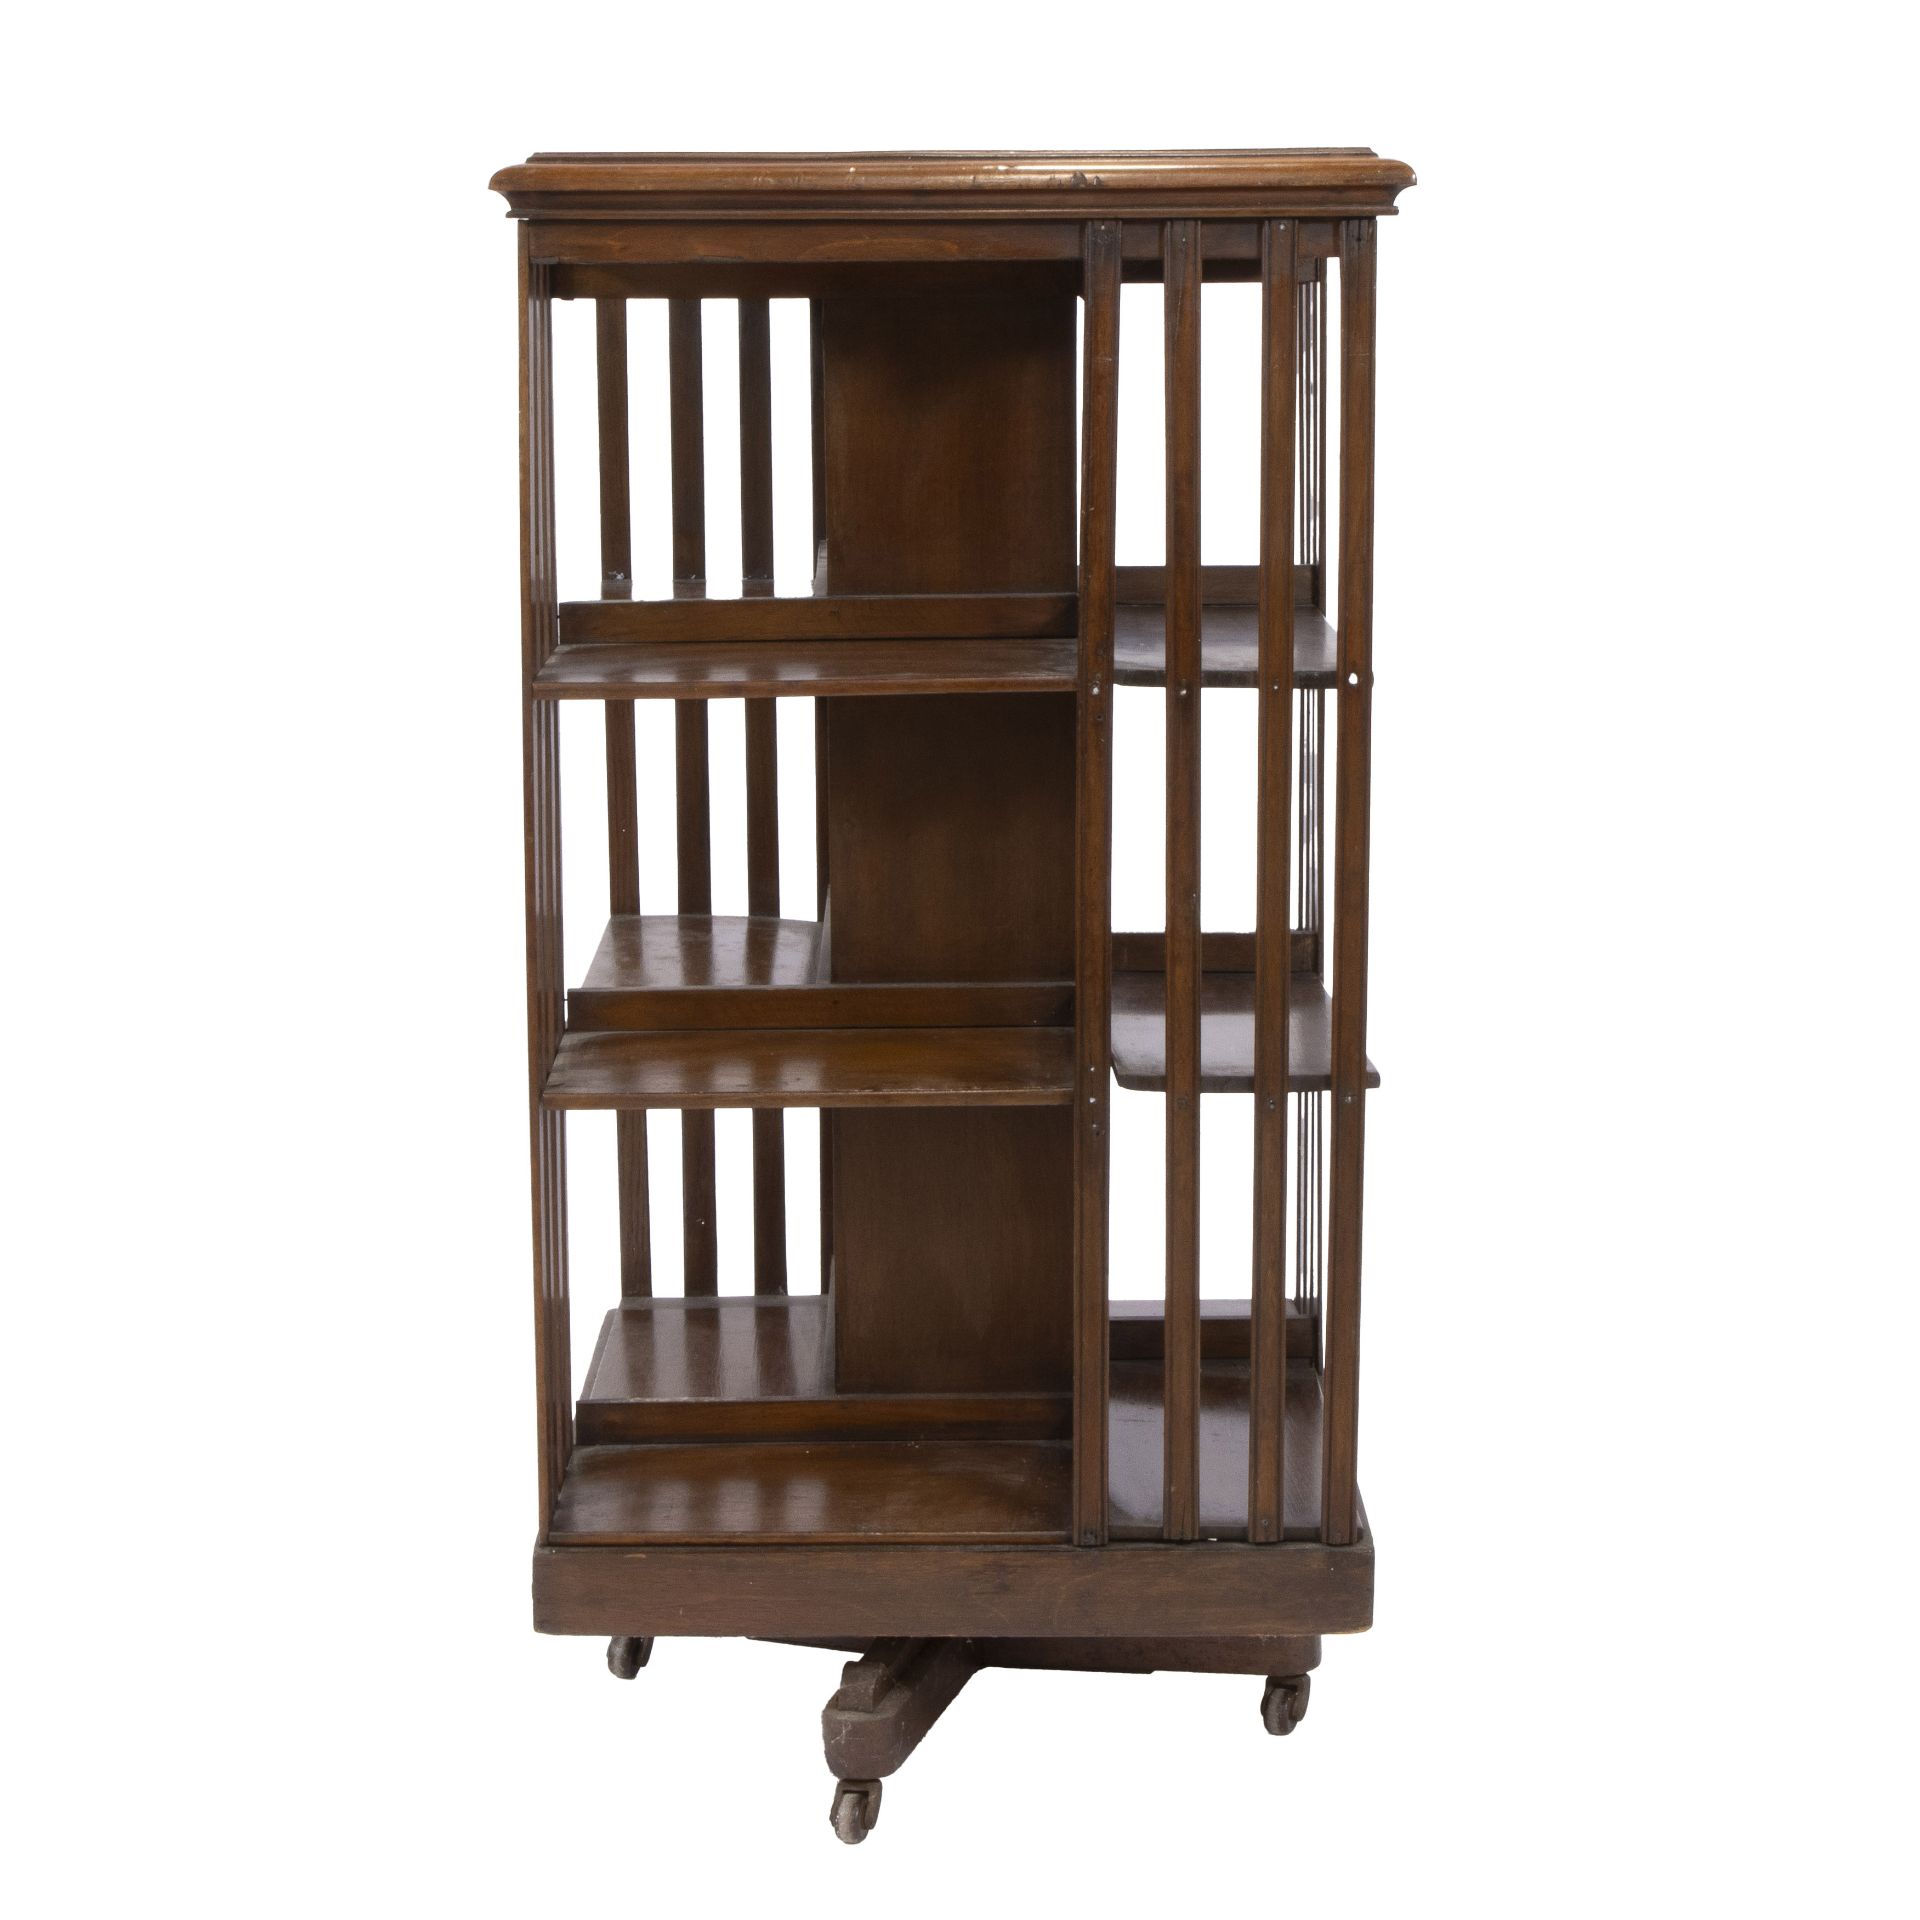 English oak bookmill with 3 levels and resting on castors, early 20th century - Bild 5 aus 6